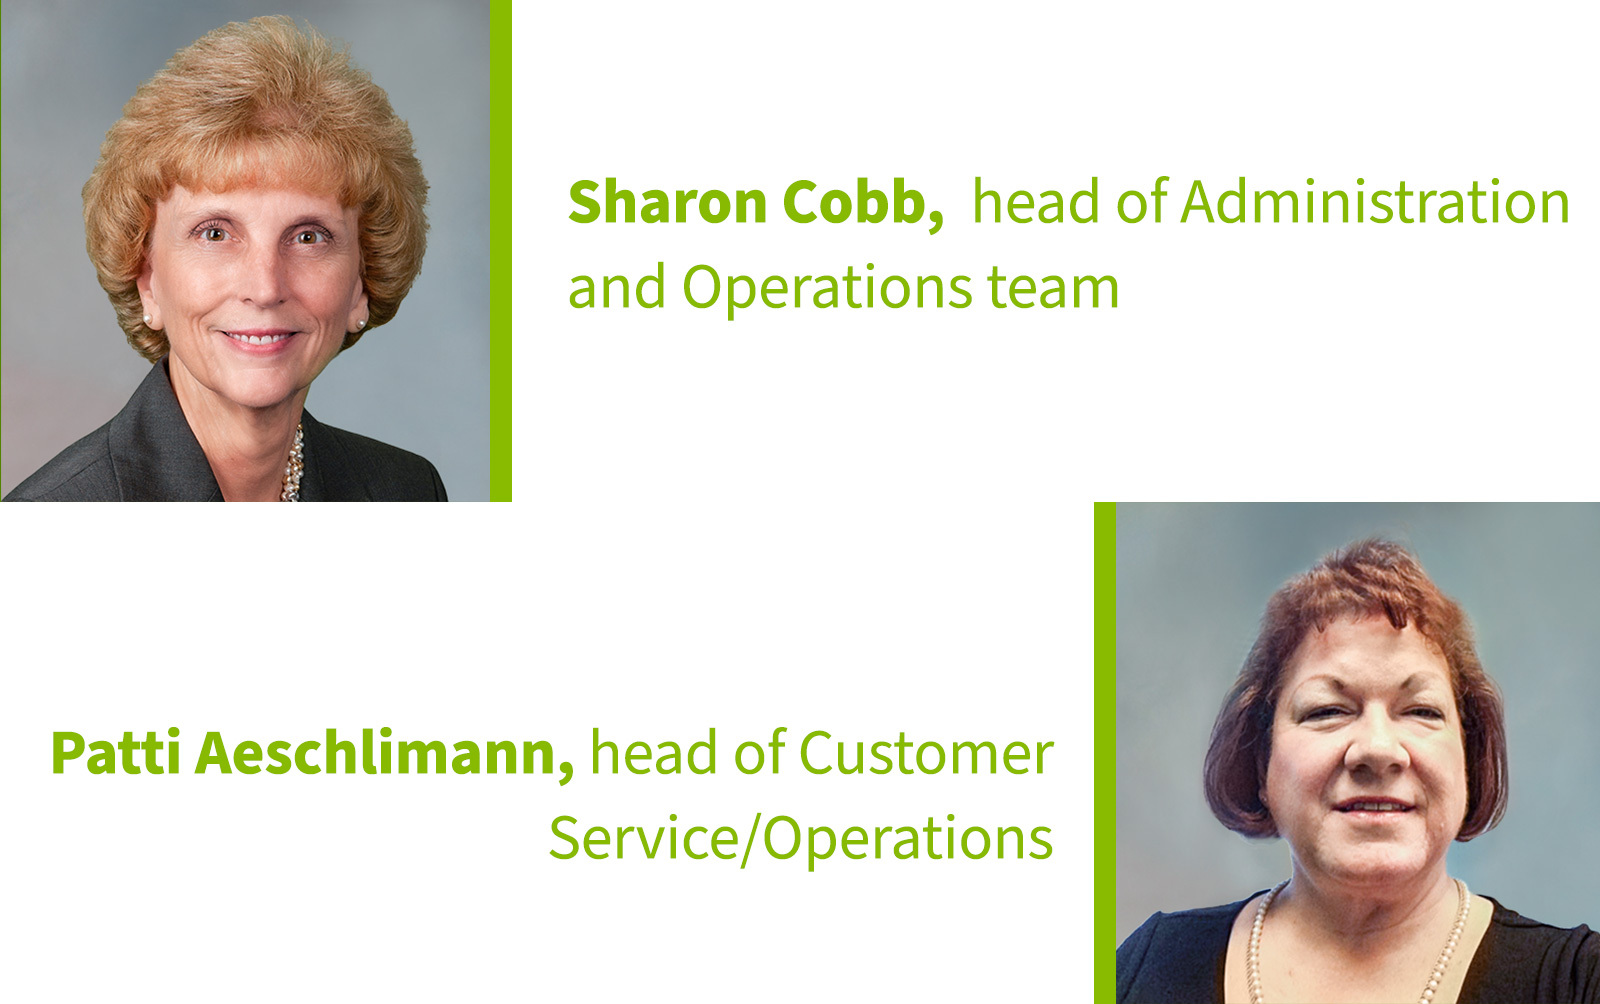 Sharon Cobb, head of Administration and Operations team; Patti Aeschlimann, head of Customer Service/Operations